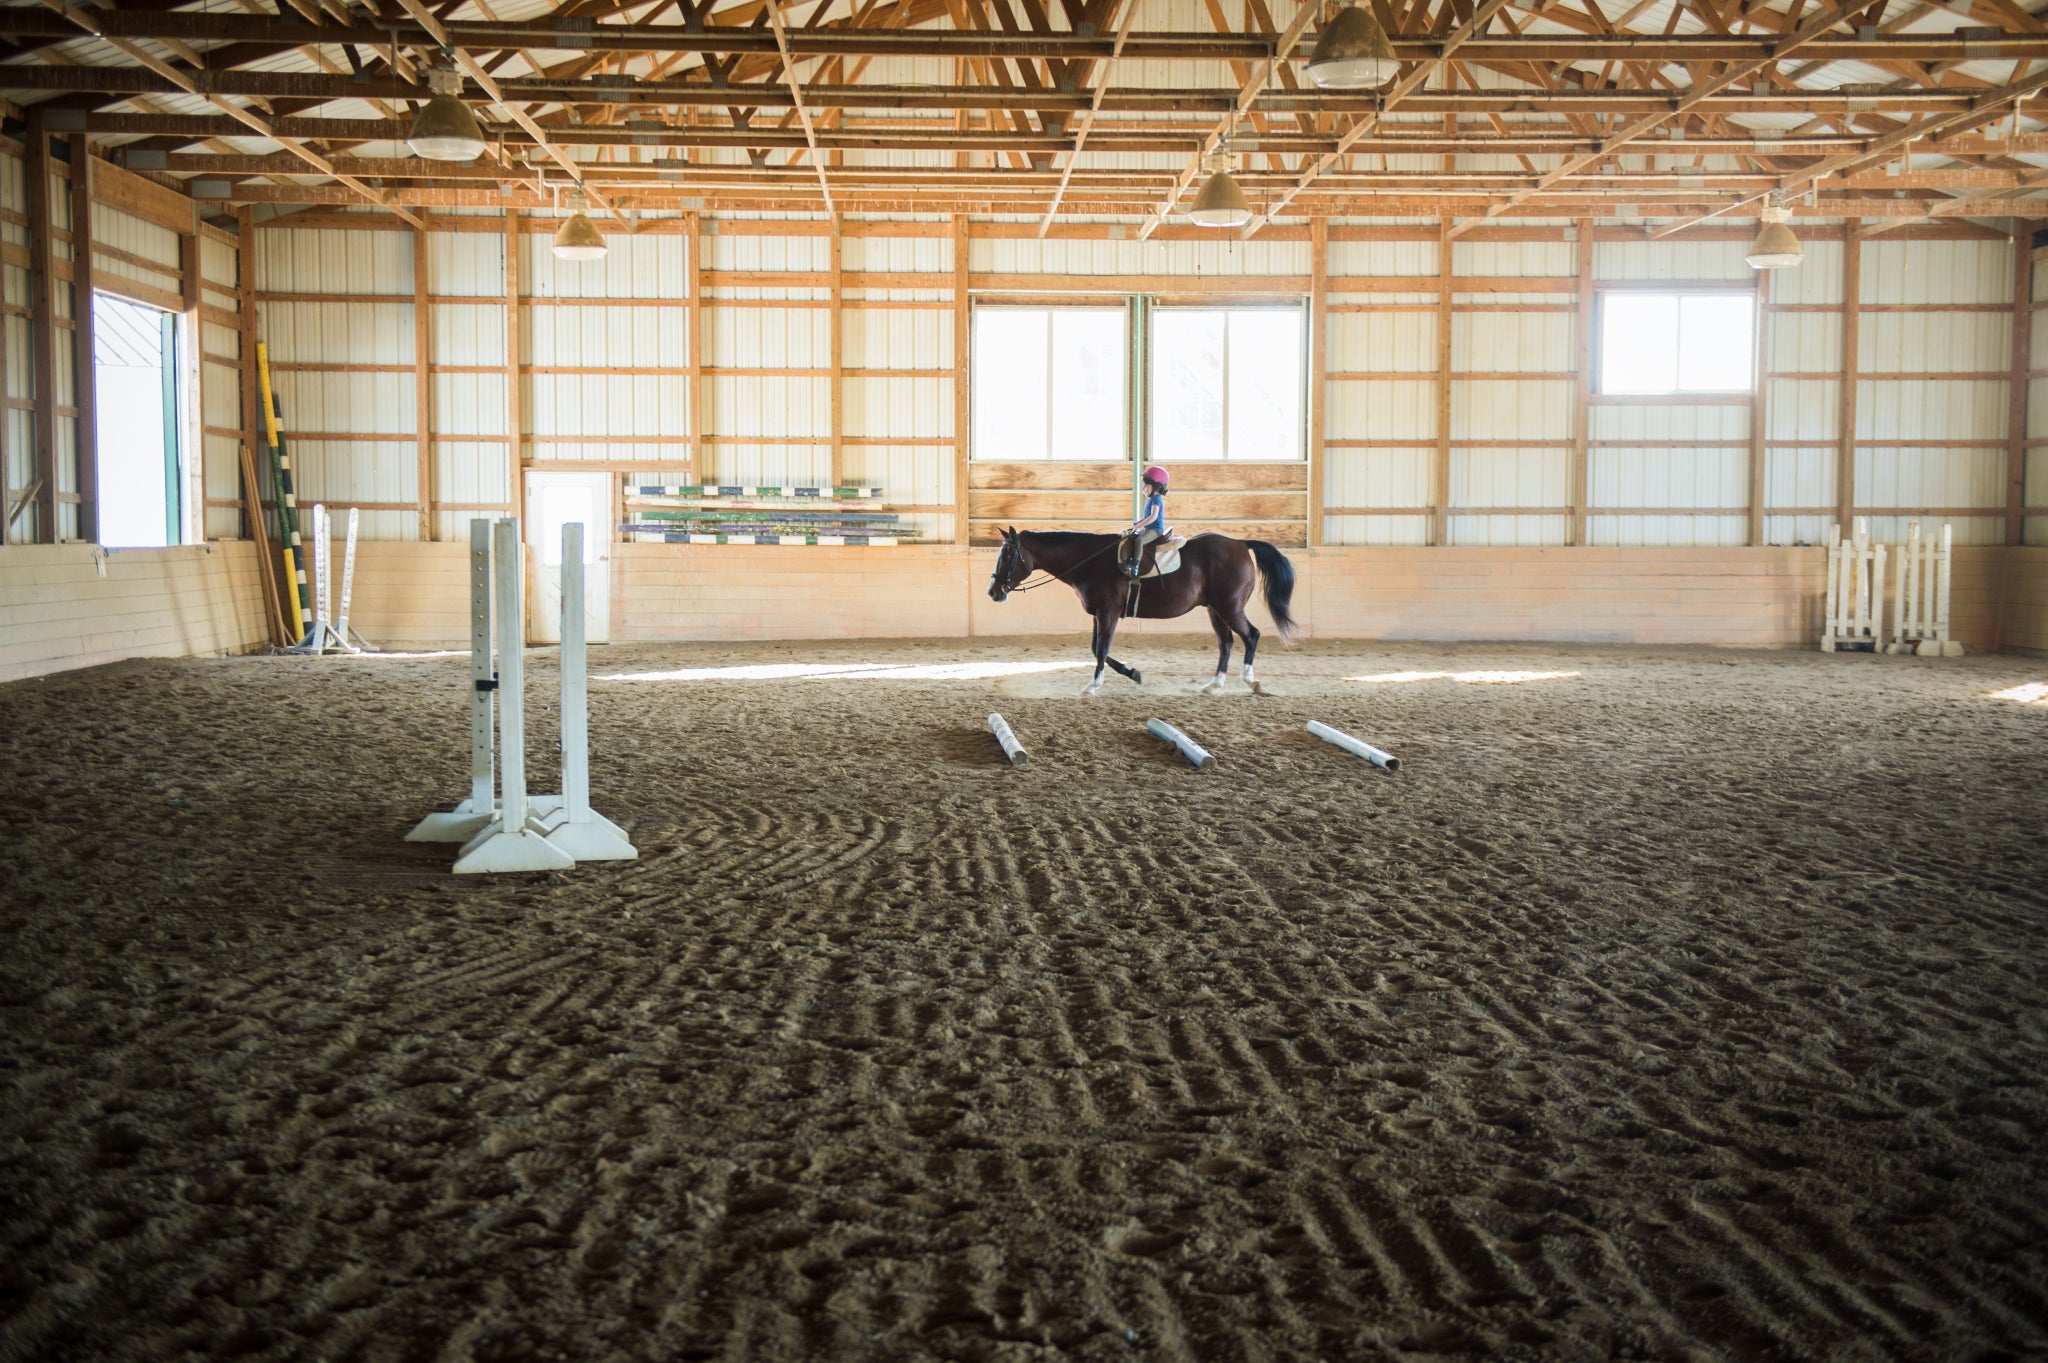 Giddy Up! The Best Places to Horse Around in the DMV